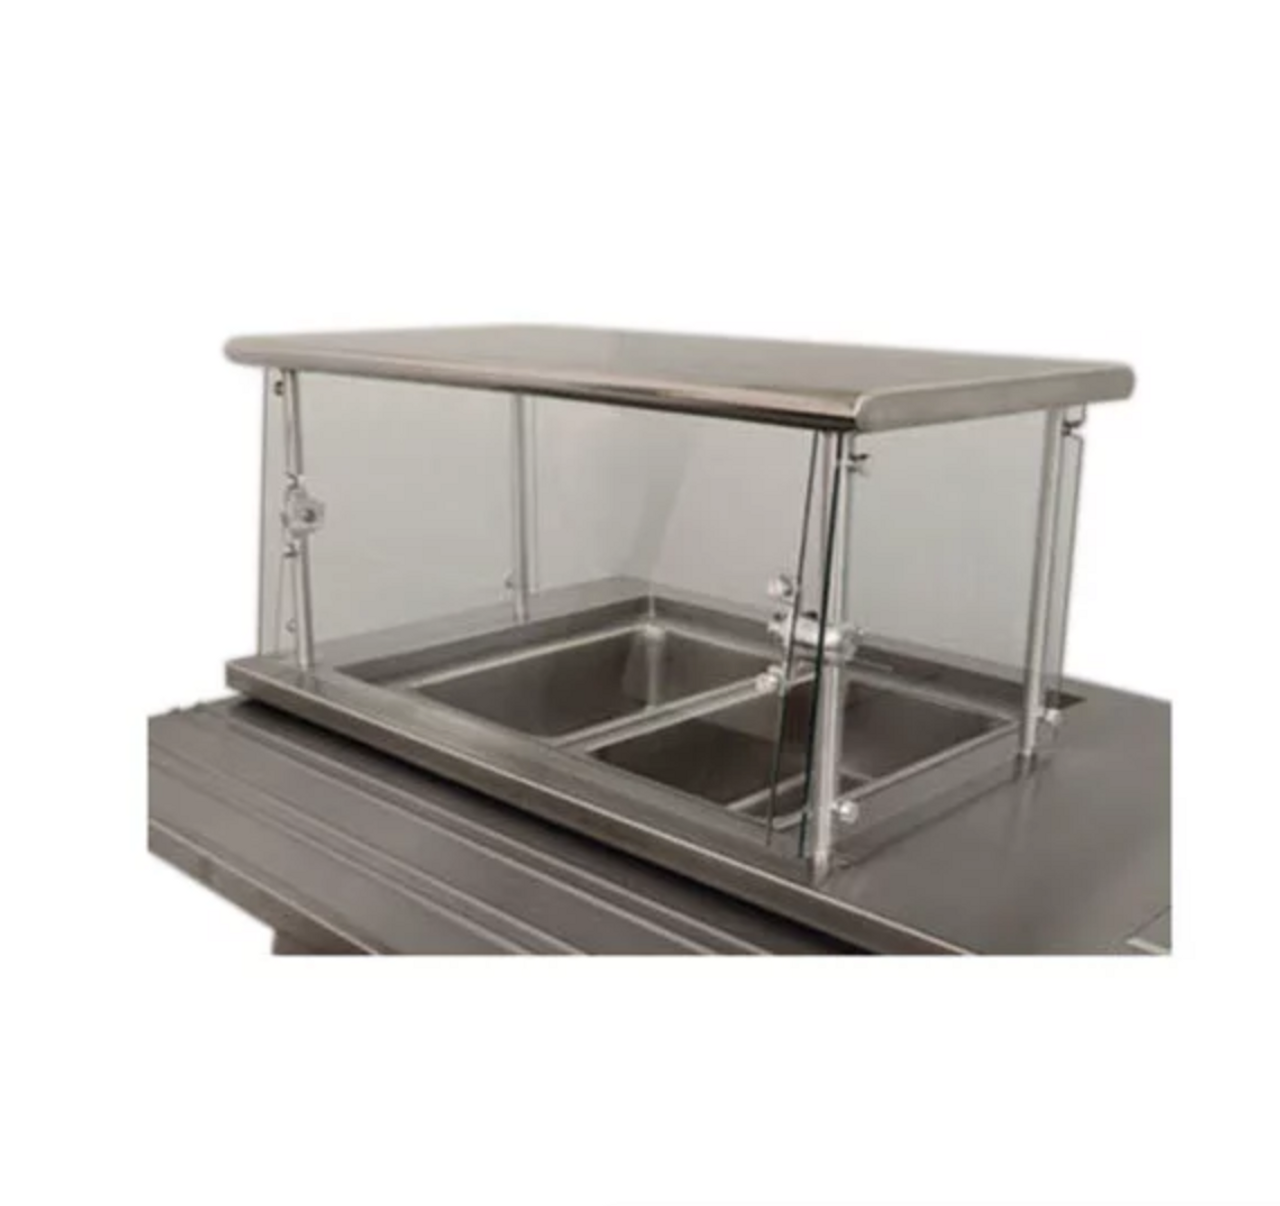 Sleek Shield NSGC-12-48 Cafeteria Food Shield with Stainless Steel Shelf - 12" x 48" x 18"-Advance Tabco 